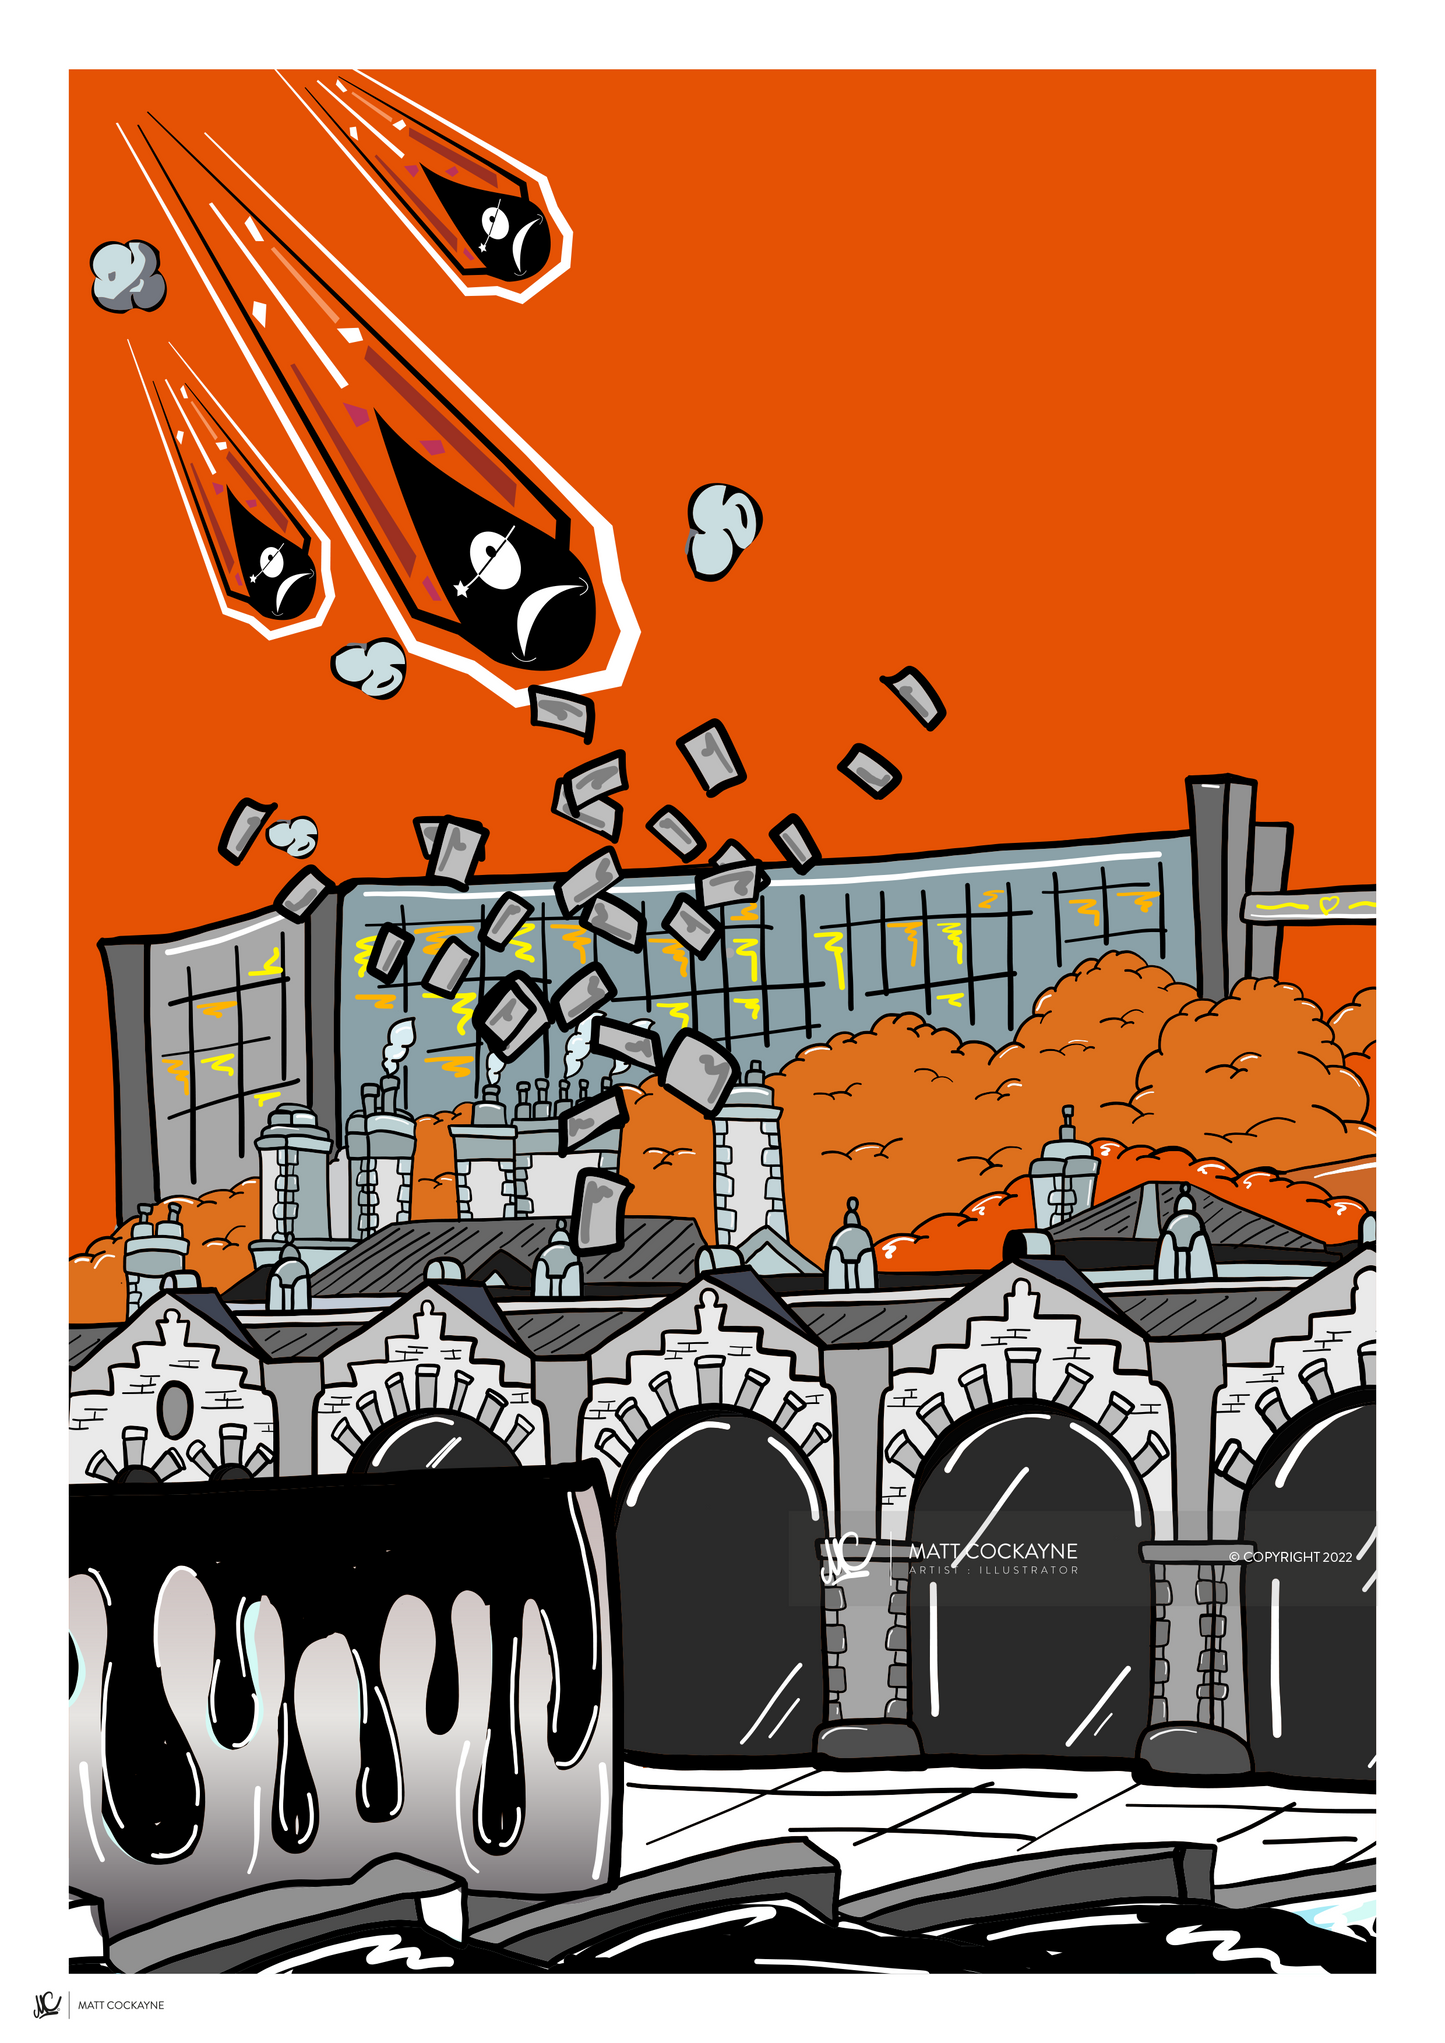 HENDOS- ATTACK OF THE HENDOS TRAIN STATION - Sheffield Prints - Wall Art - Poster - Print - Canvas - Illustration